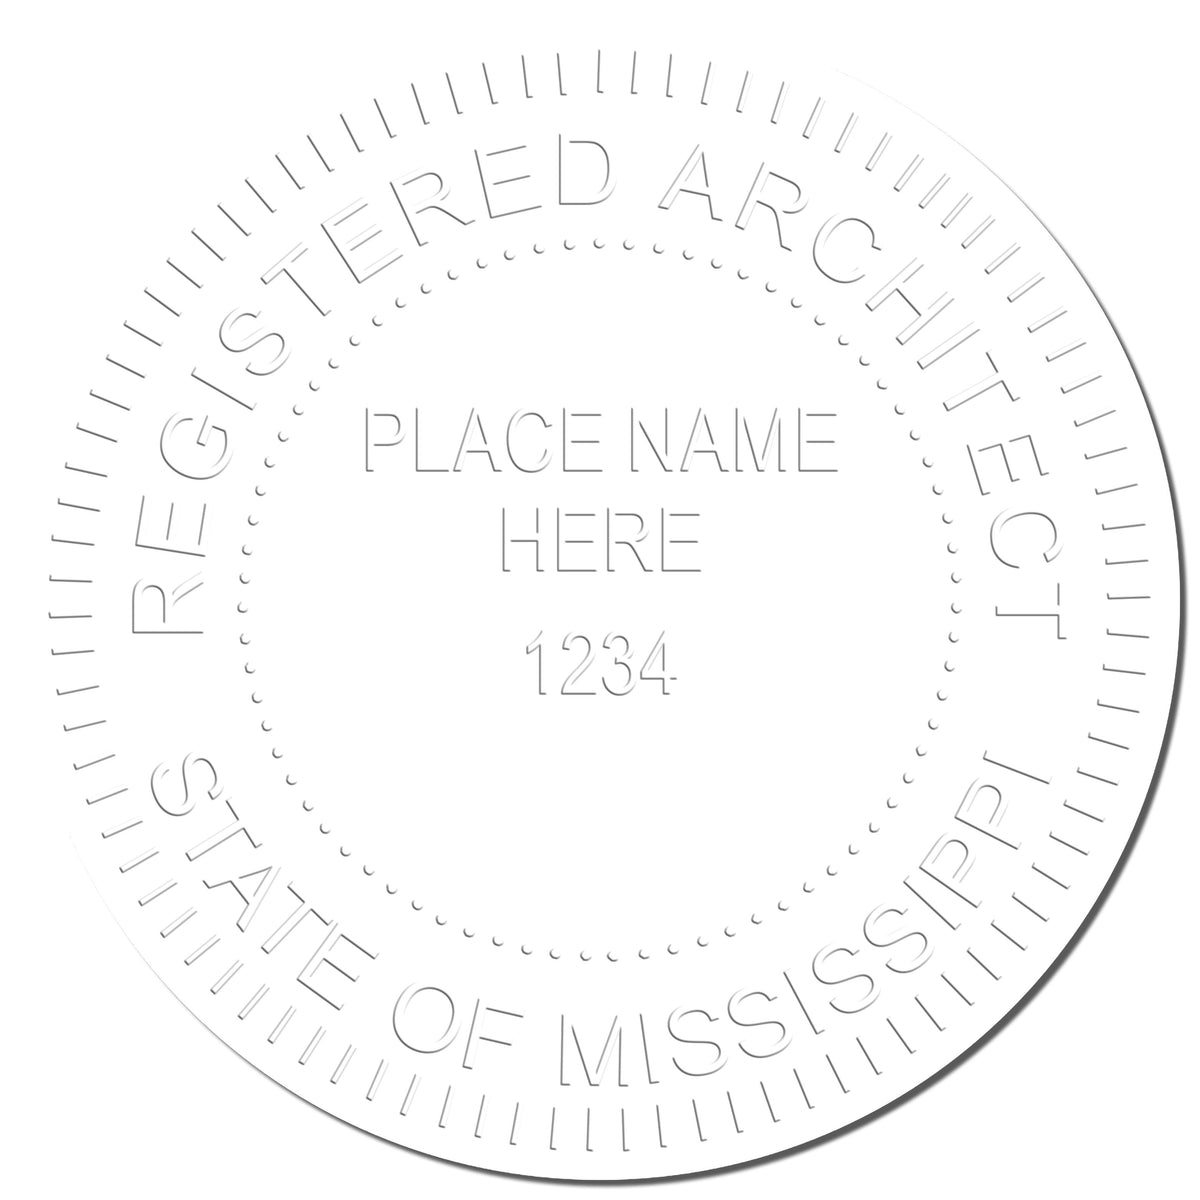 This paper is stamped with a sample imprint of the Hybrid Mississippi Architect Seal, signifying its quality and reliability.